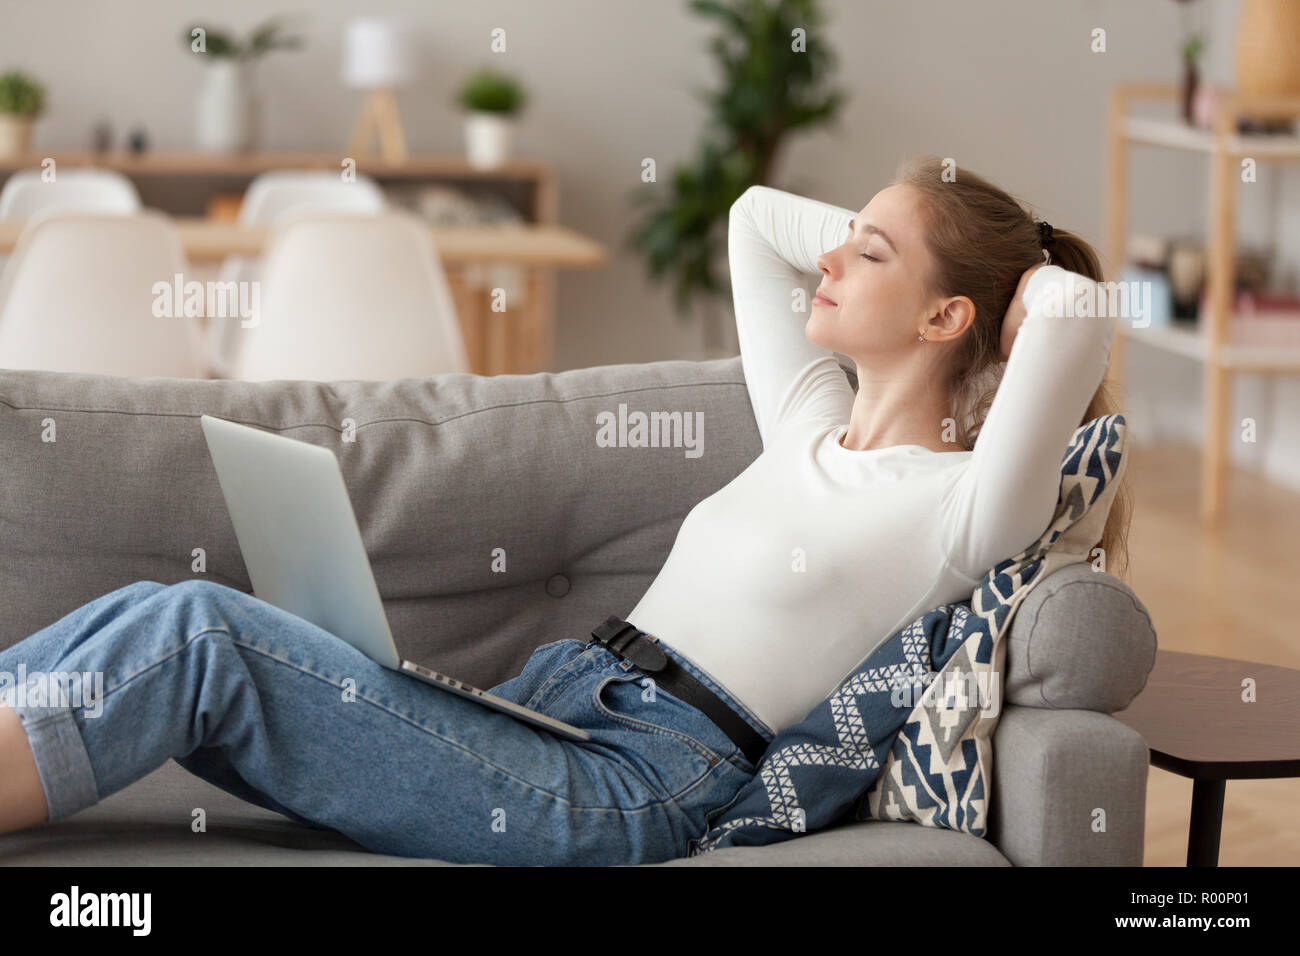 Attractive woman with computer lying on couch Stock Photo